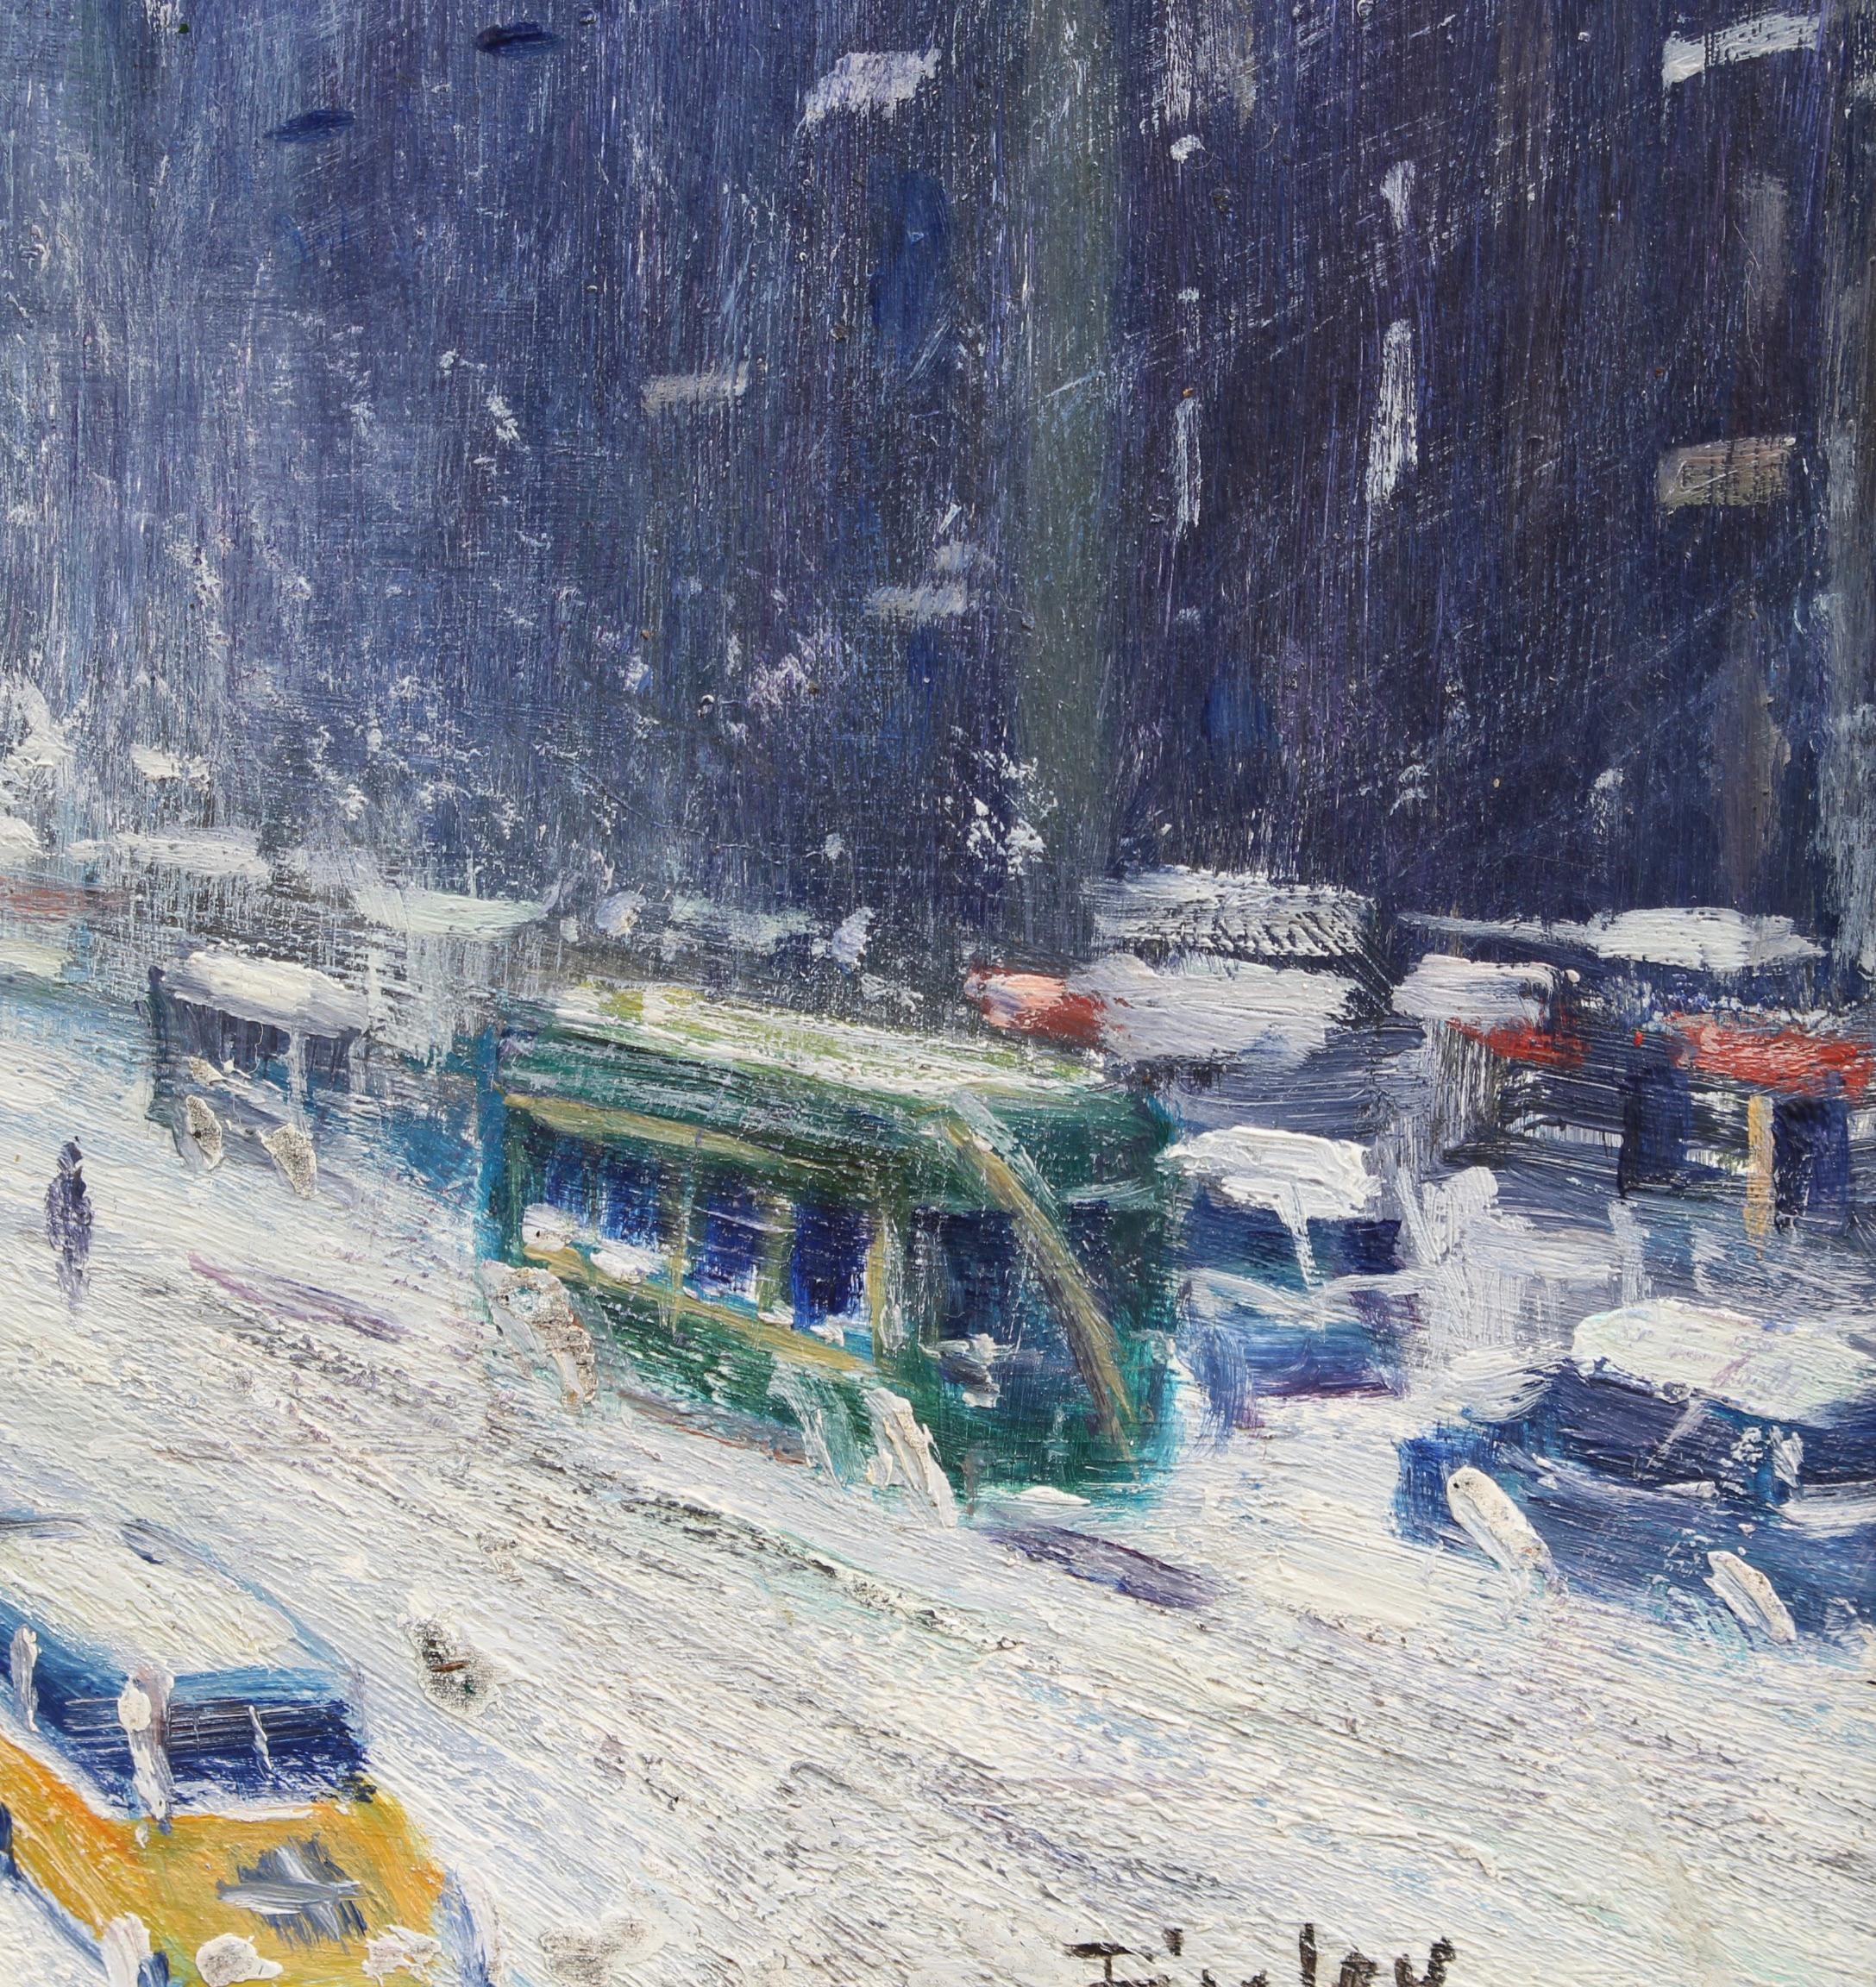 'New York Public Library Under Snow 1940s' by Finley 7